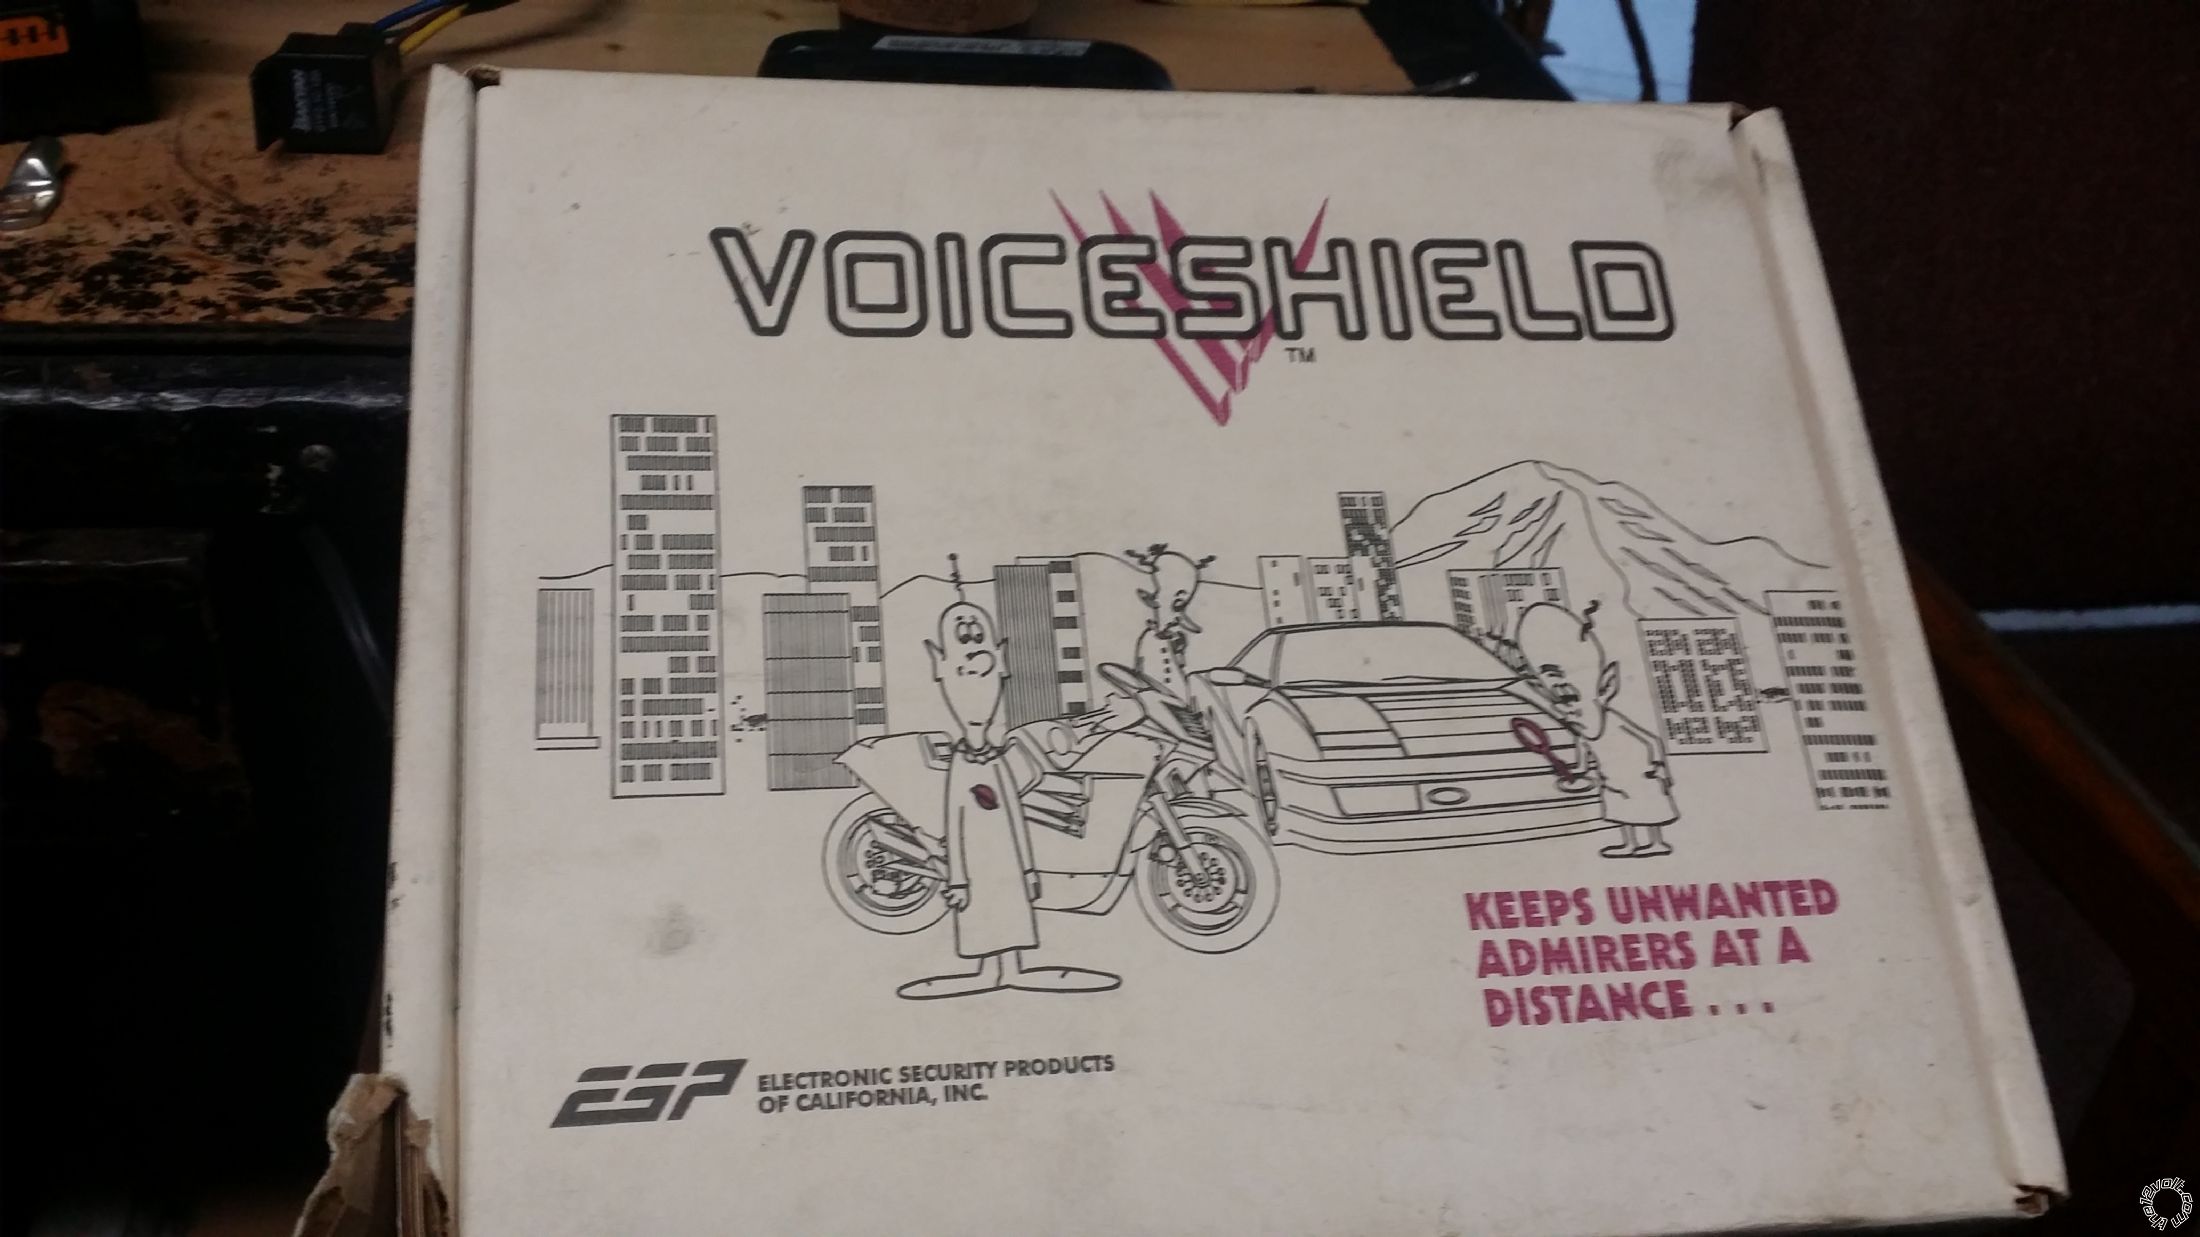 Voiceshield Wiring Diagram Needed - Last Post -- posted image.